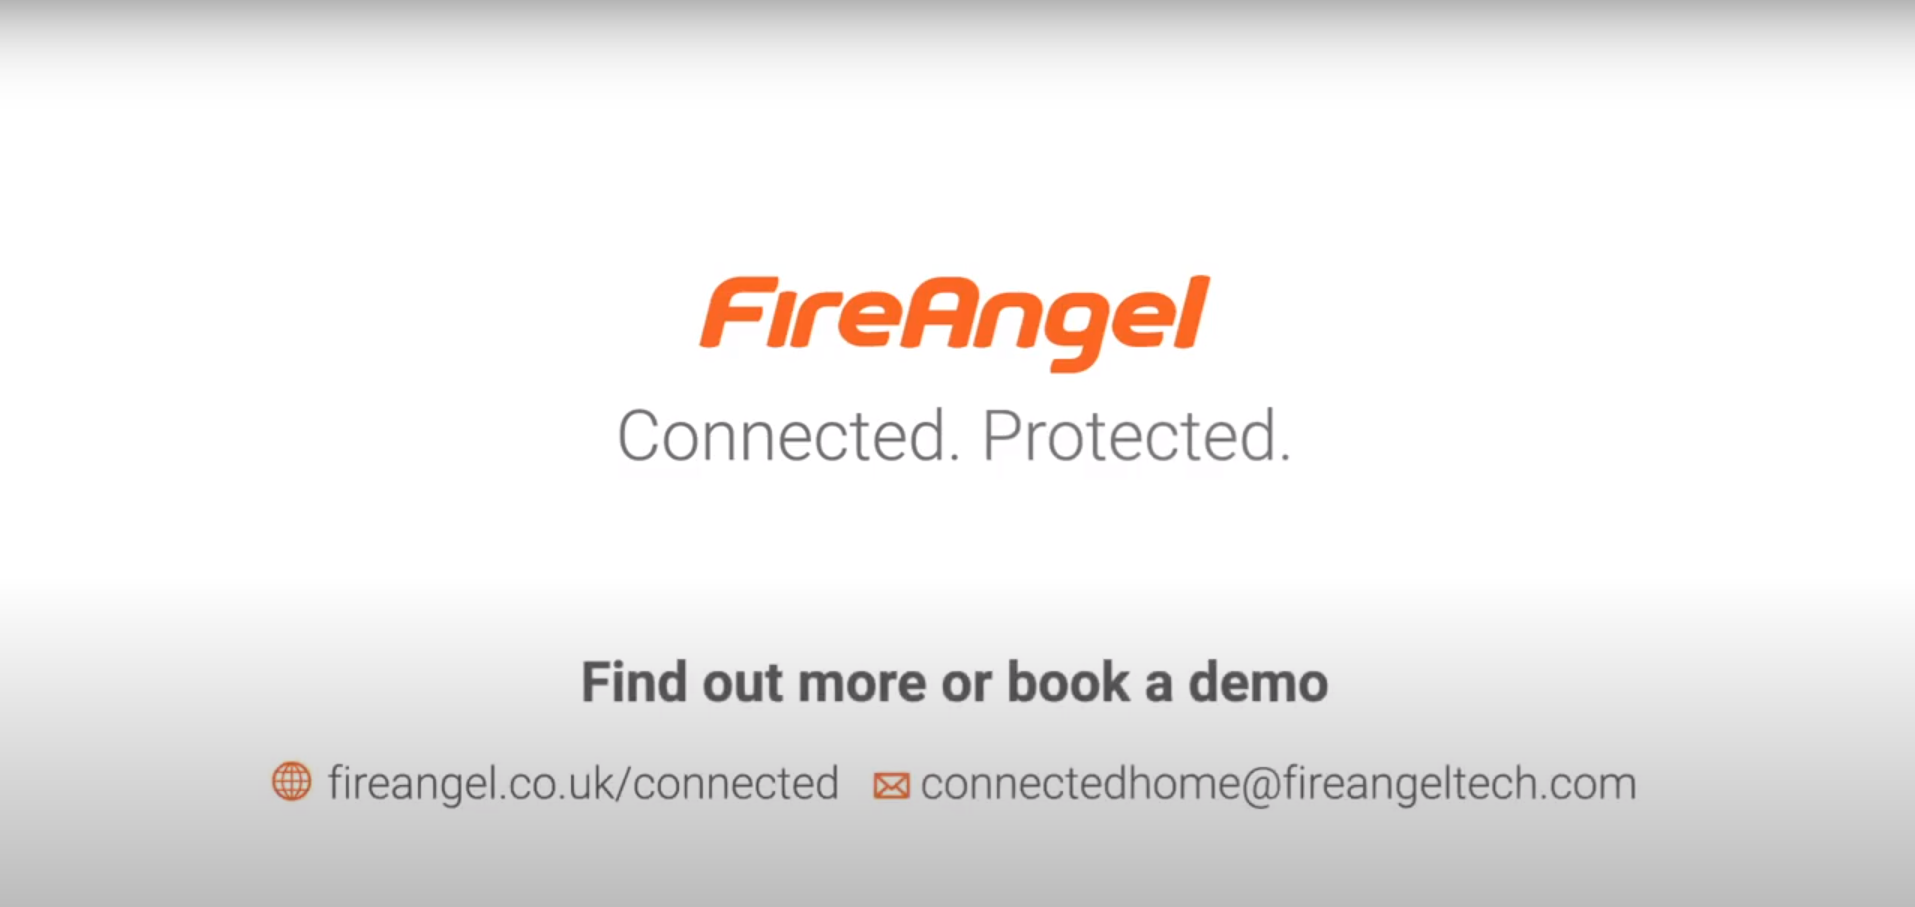 FireAngel Connected - The connected solution for Landlords